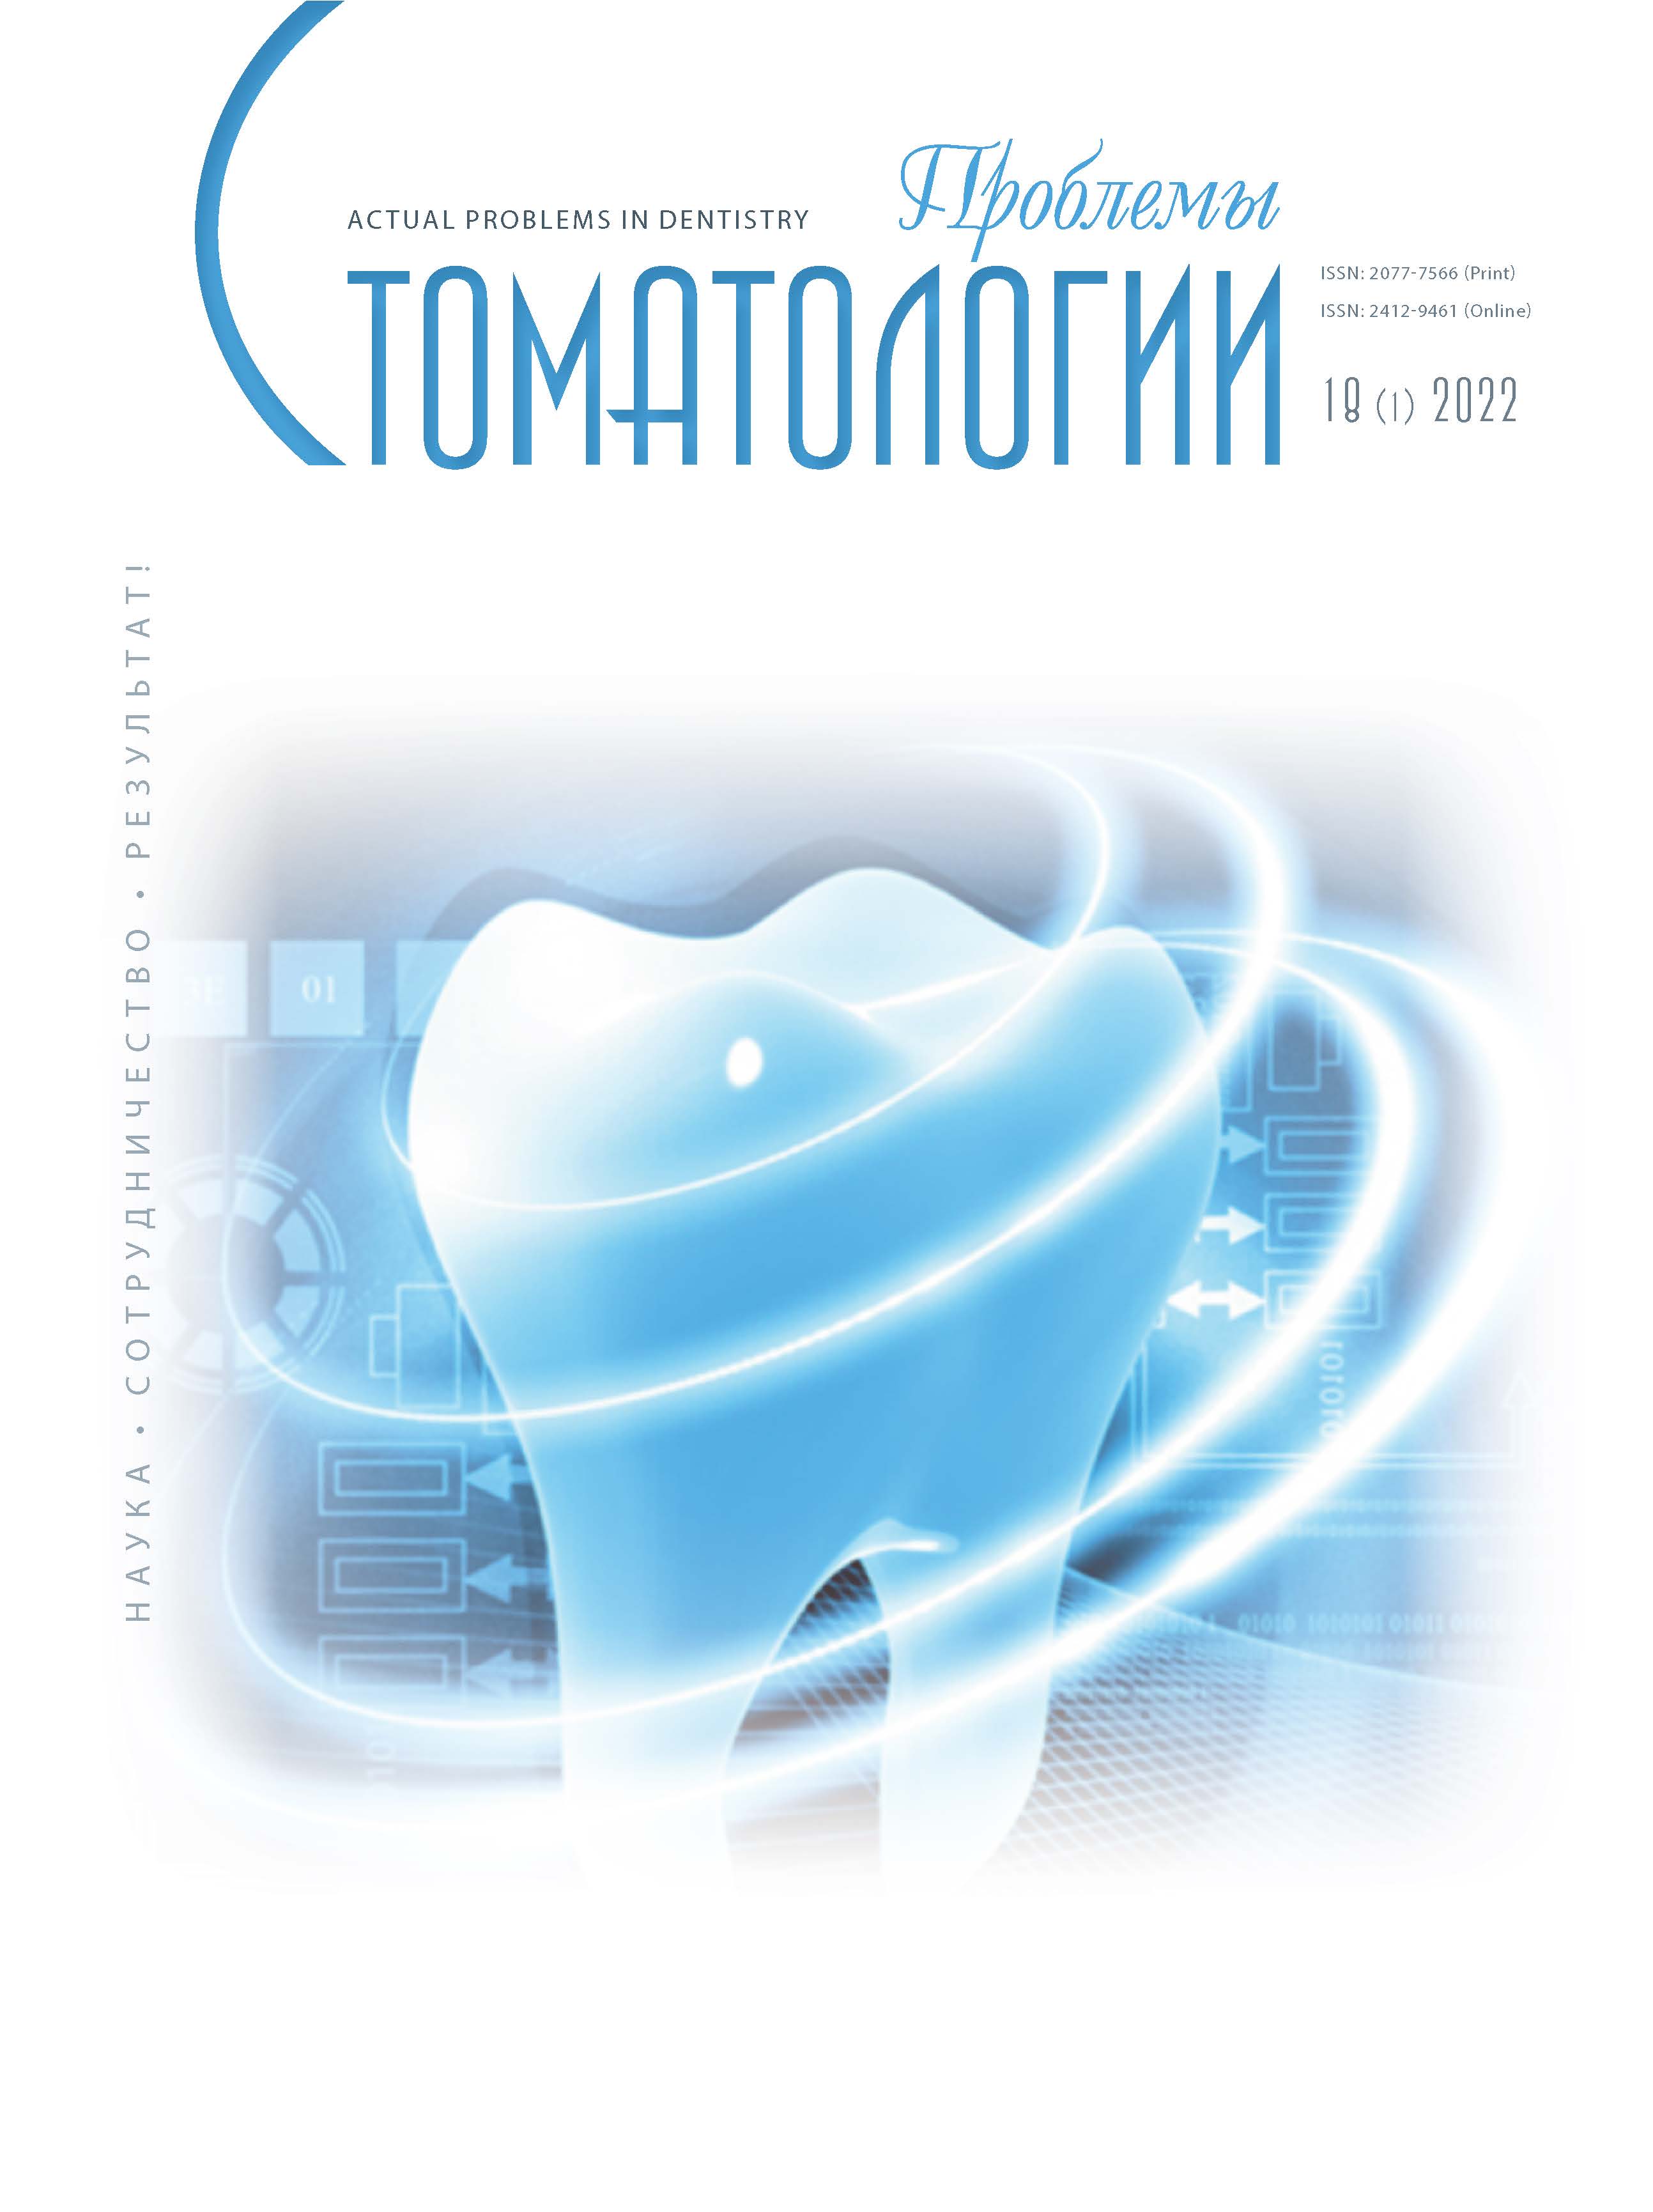                         DIGITAL TECHNOLOGIES IN ORTHOPAEDIC DENTISTRY: THE MODERN STATE OF THE ART IN RUSSIA. THE STAGES OF EVOLUTION IN DEVELOPMENT AND PERFECTION OF TECHNOLOGIES FOR DENTURE MANUFACTURING (A LITERATURE REVIEW)
            